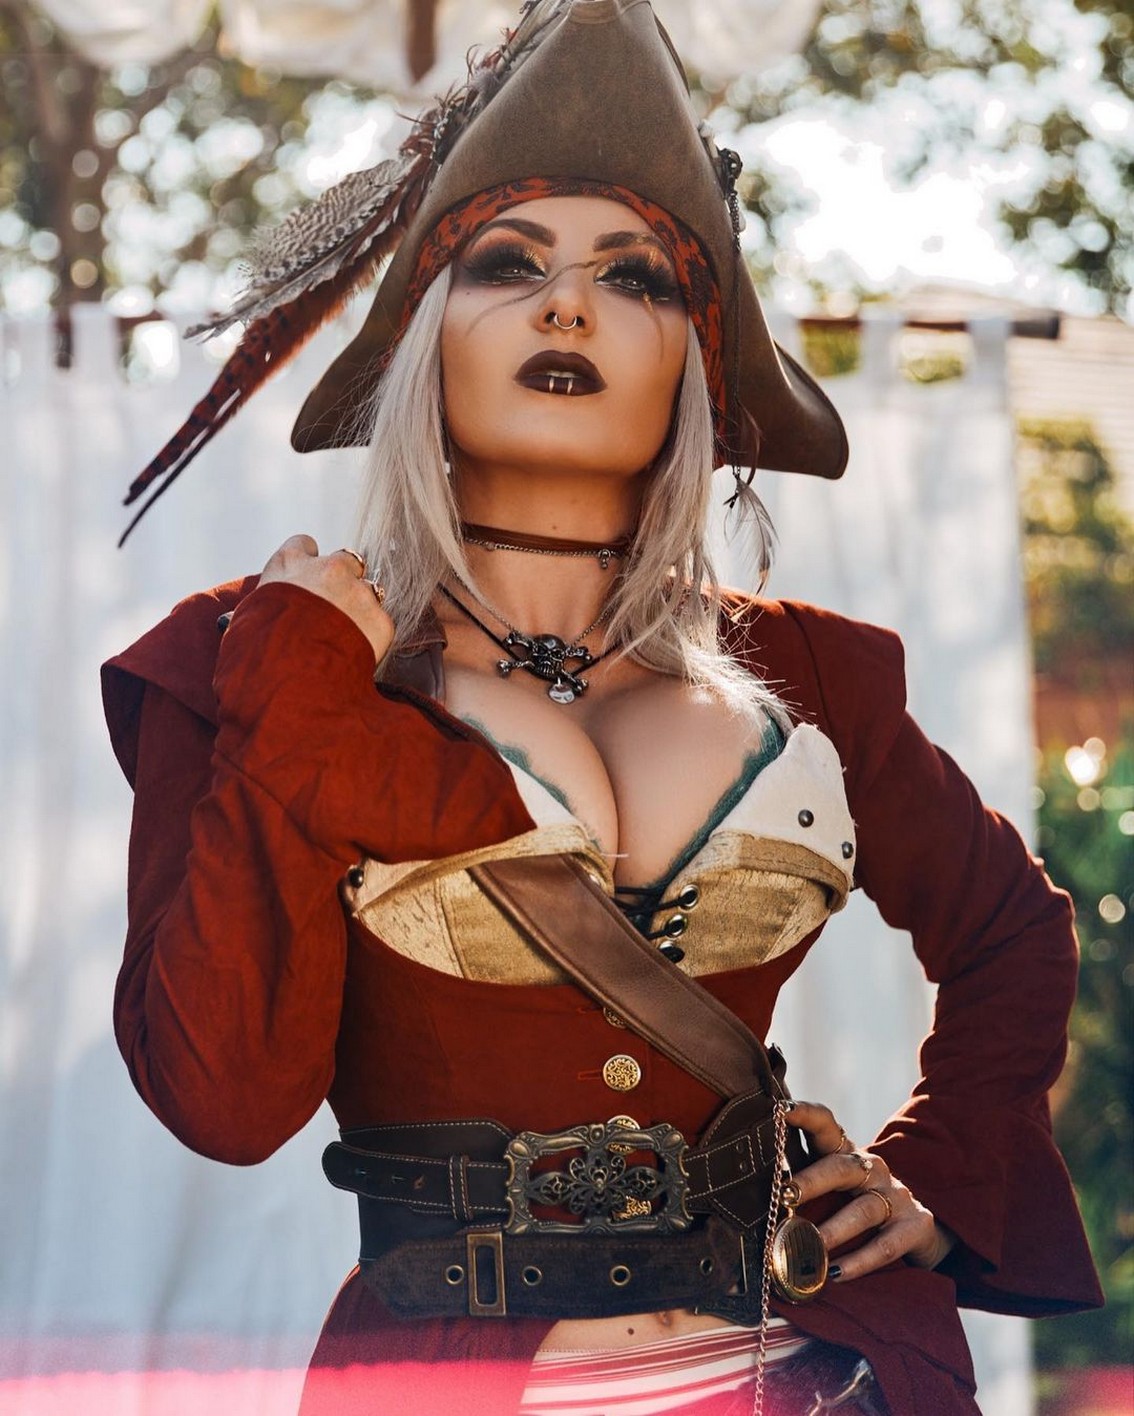 Get ready for an exhilarating Halloween as Jessica Nigri stuns in a topless pirate costume, with her nipples adorned in shiny stickers. This 32-year-old cosplay sensation hailing from New Zealand is taking the spooky season to a whole new level. Don't miss out on this jaw-dropping transformation that is sure to leave you in awe!